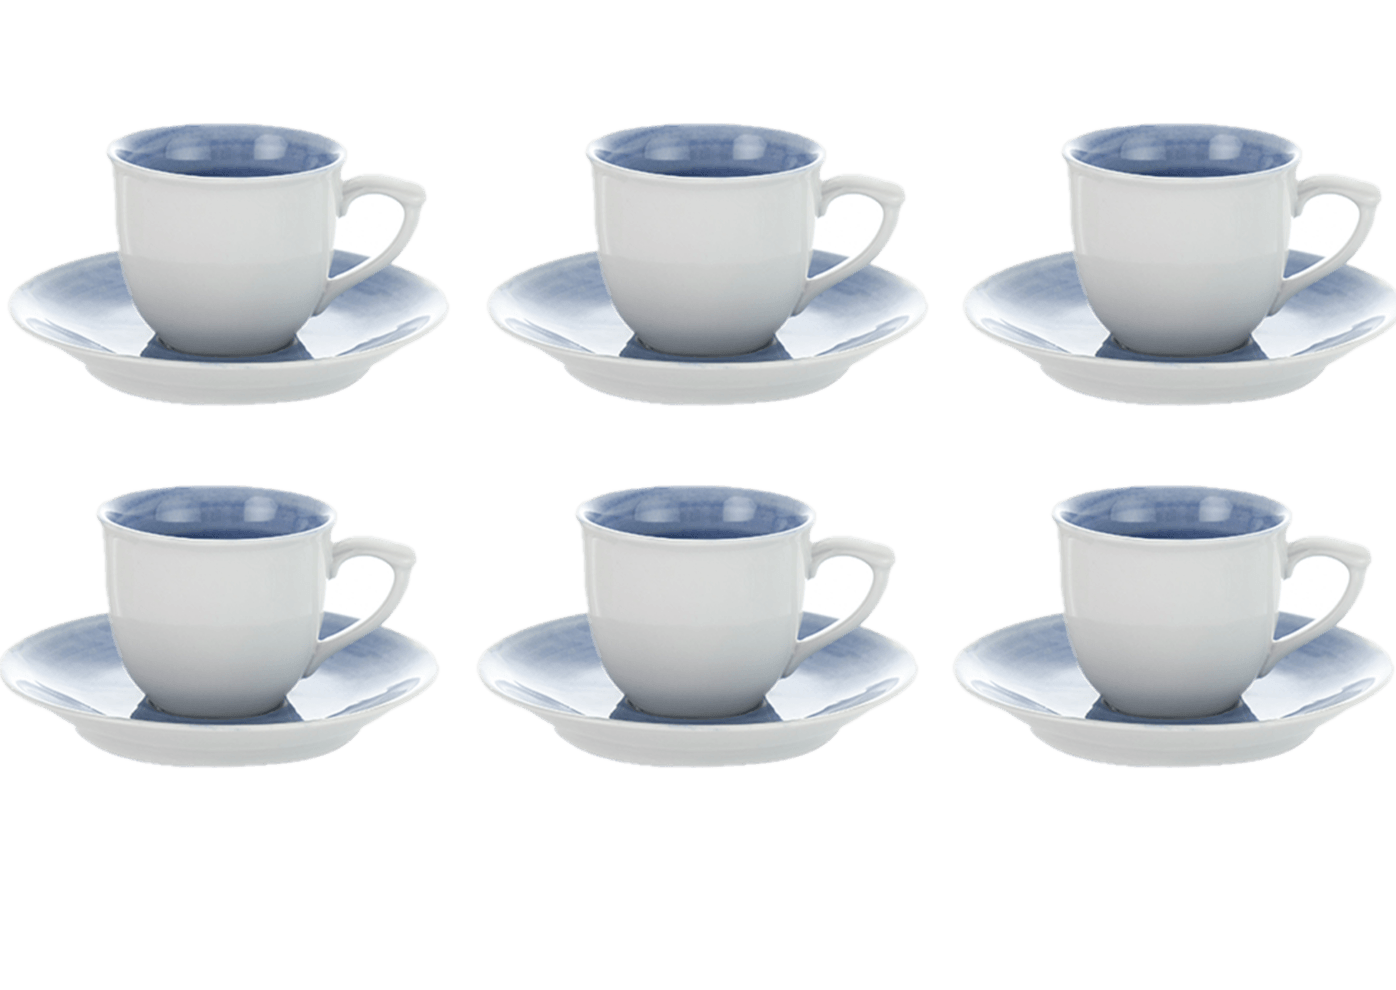 Senzo - Plume - Coffee Cup Set 6 Pieces with Saucer - Blue - Porcelain - 165ml - 520001164x6